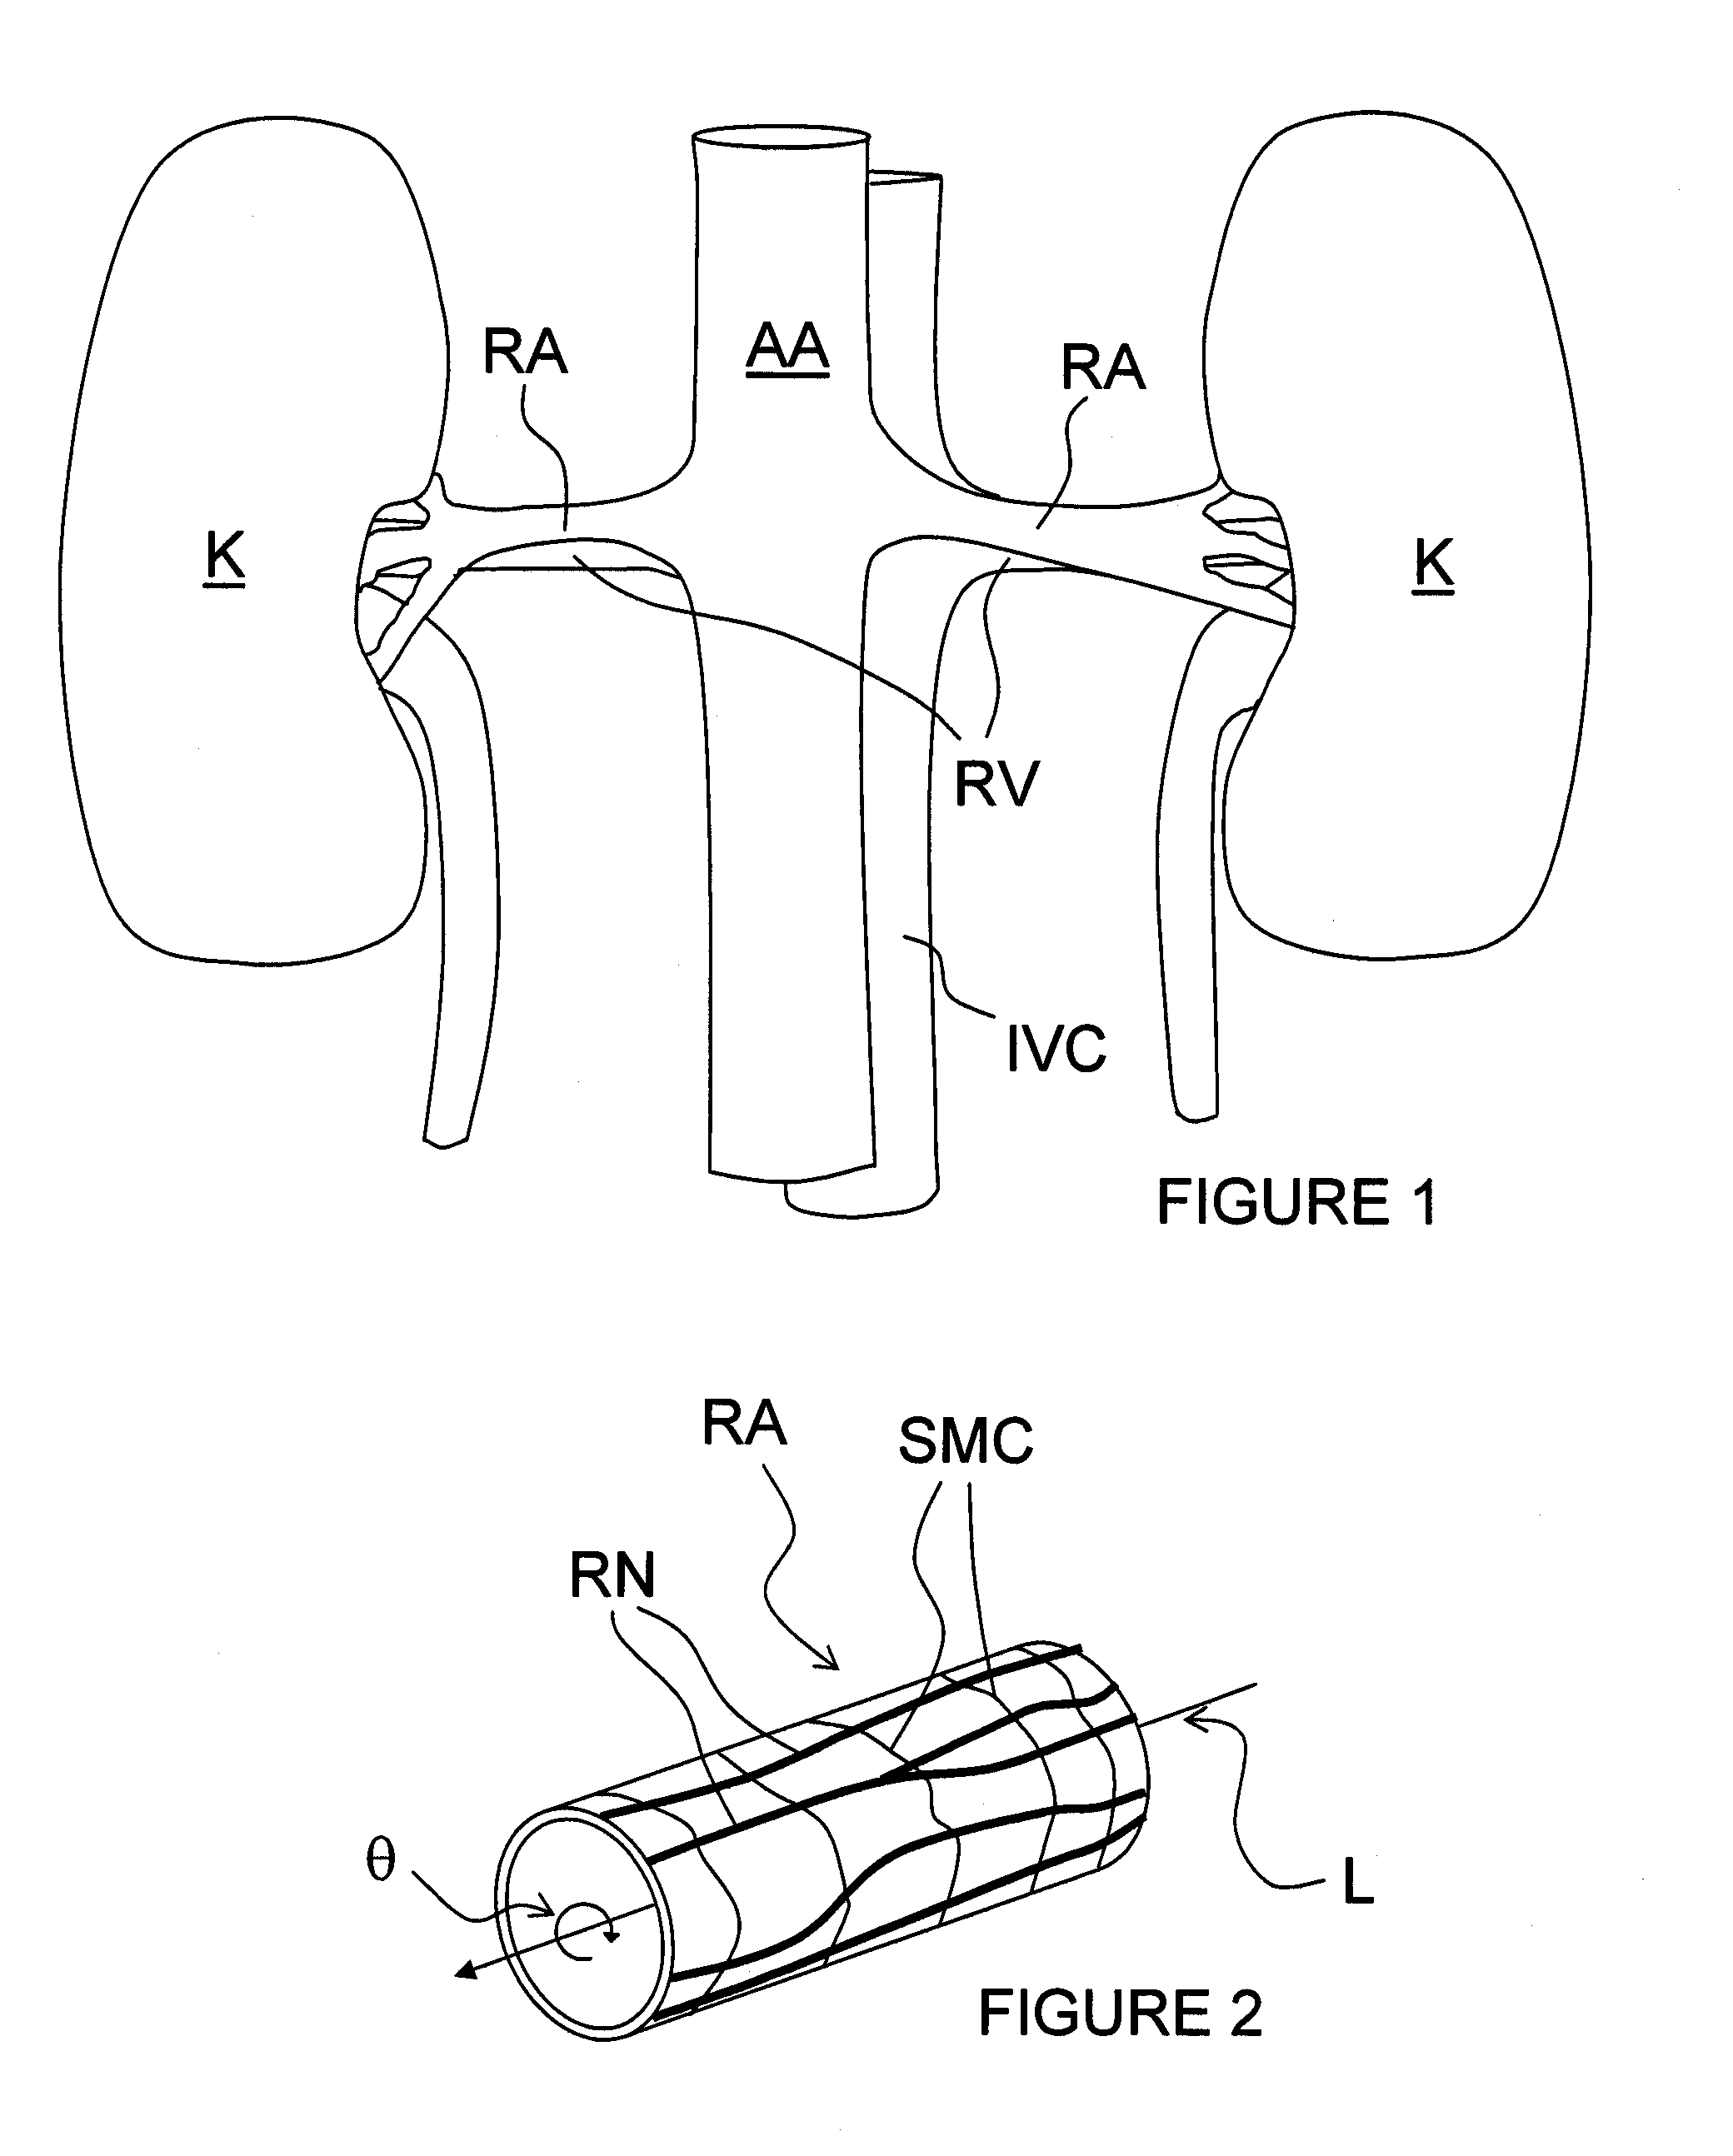 Methods for thermally-induced renal neuromodulation